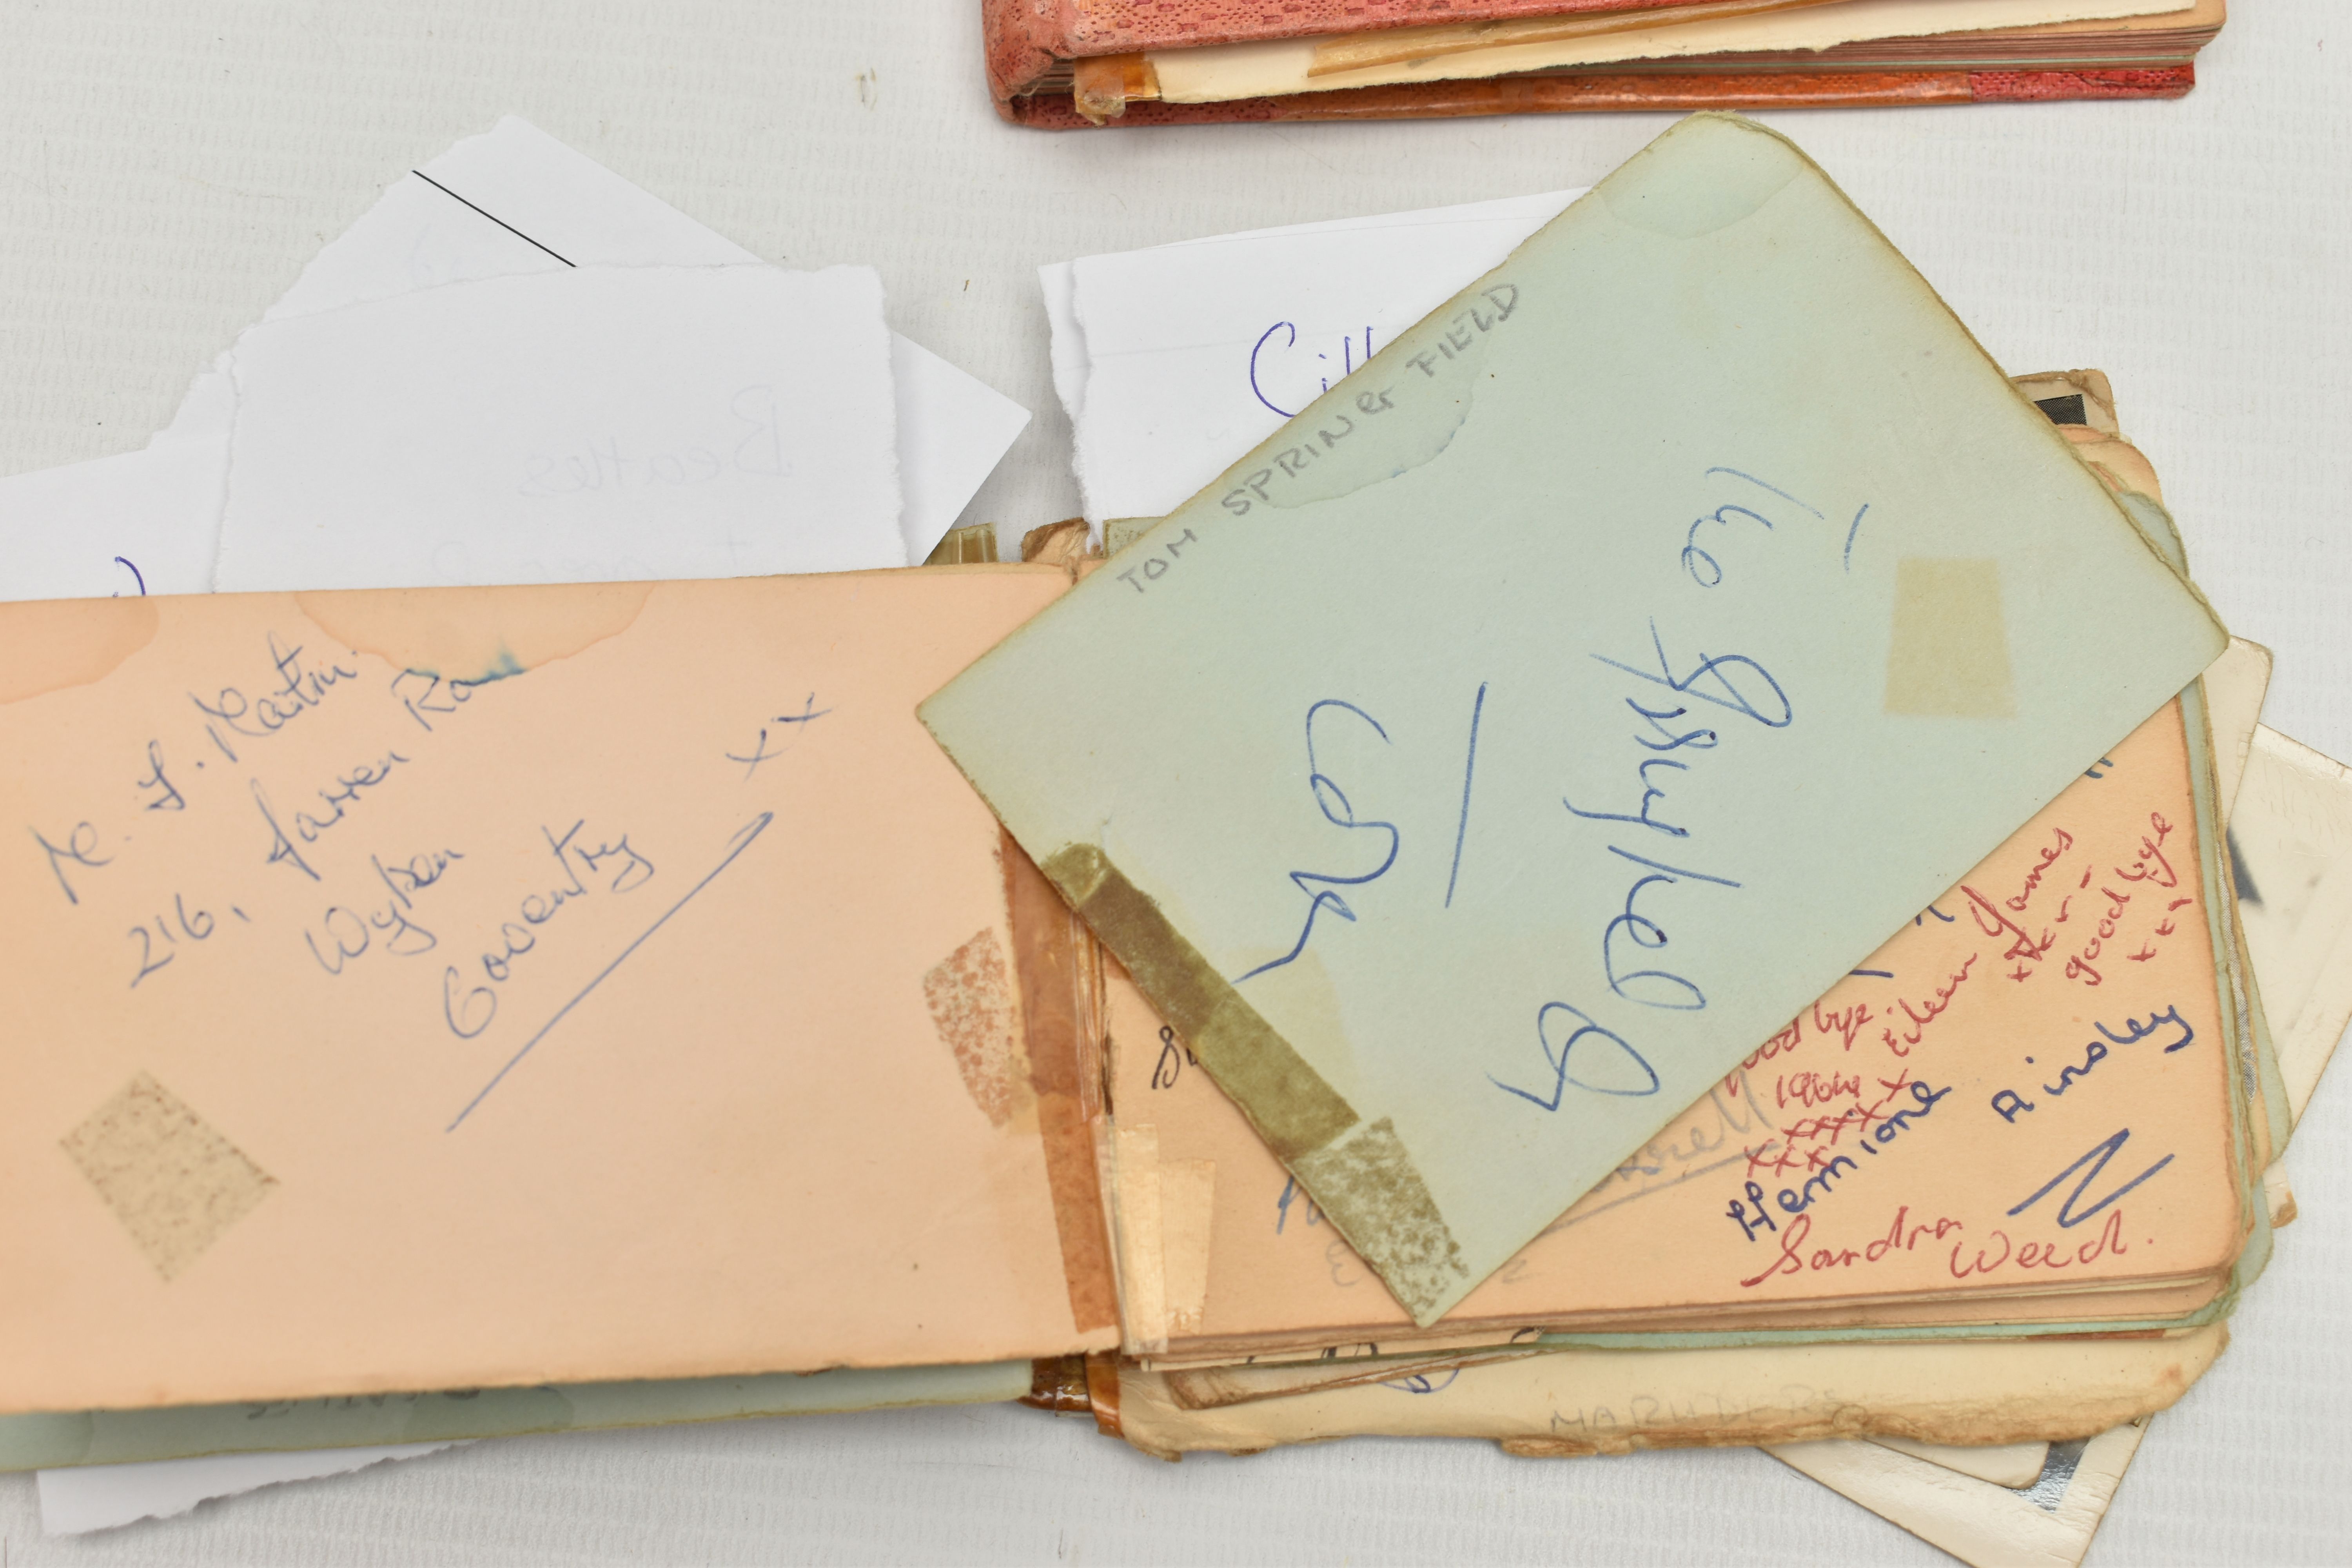 THE BEATLES AUTOGRAPHS, two autograph albums and two photographs, the Woburn Abbey autograph book is - Image 17 of 22